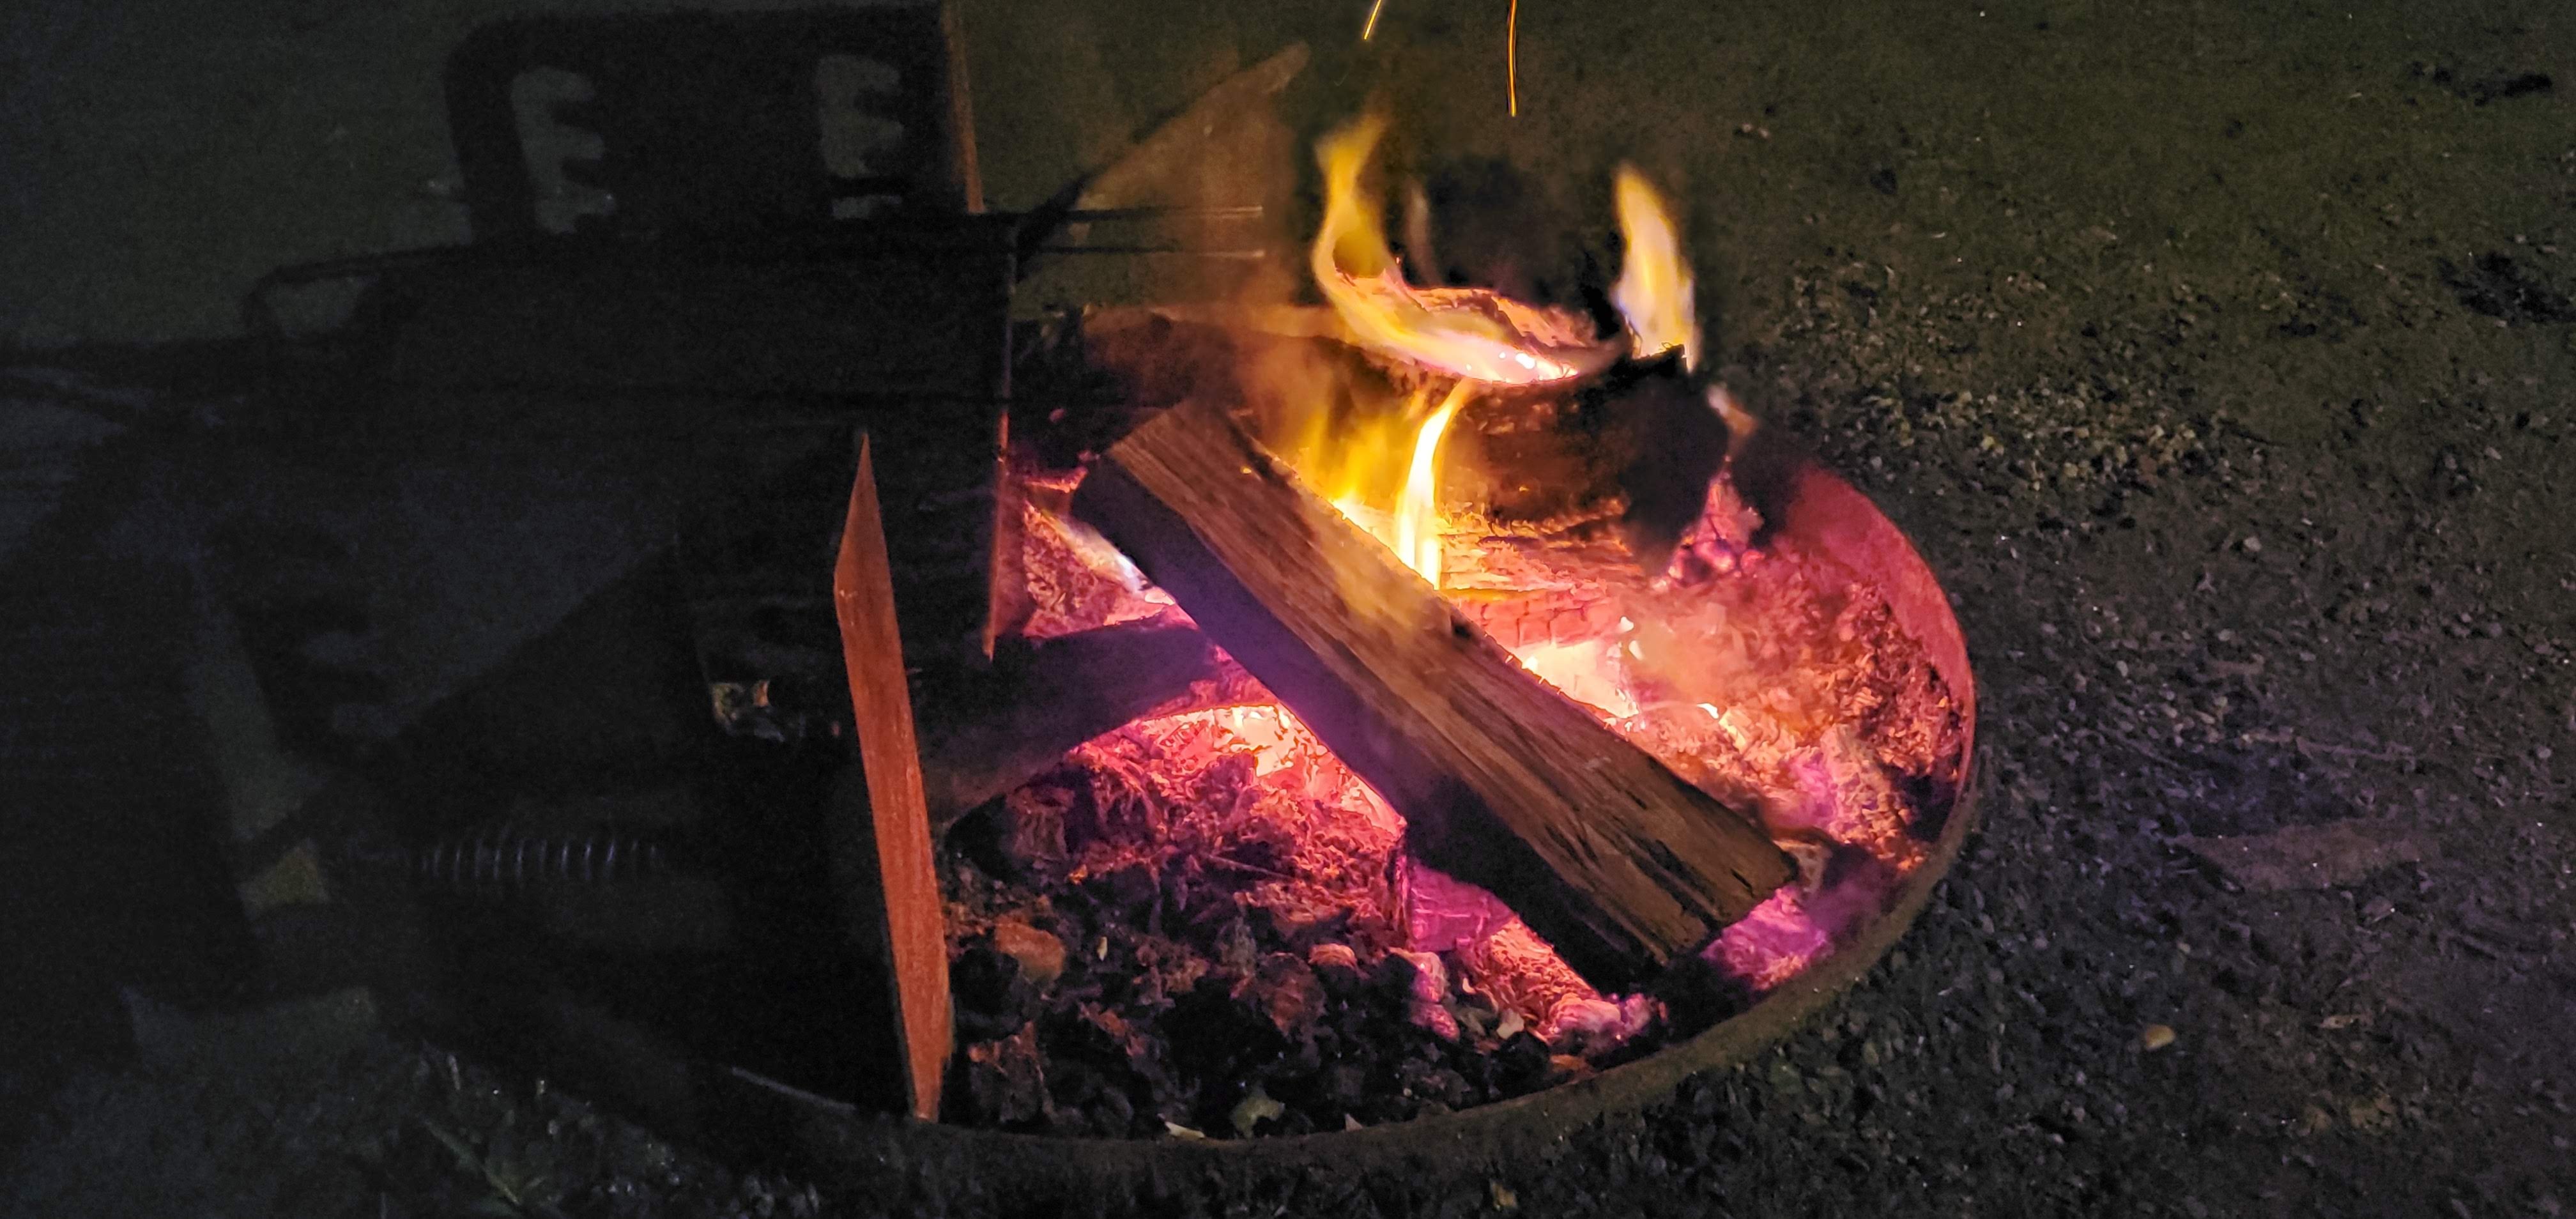 Relaxing by the camp fire